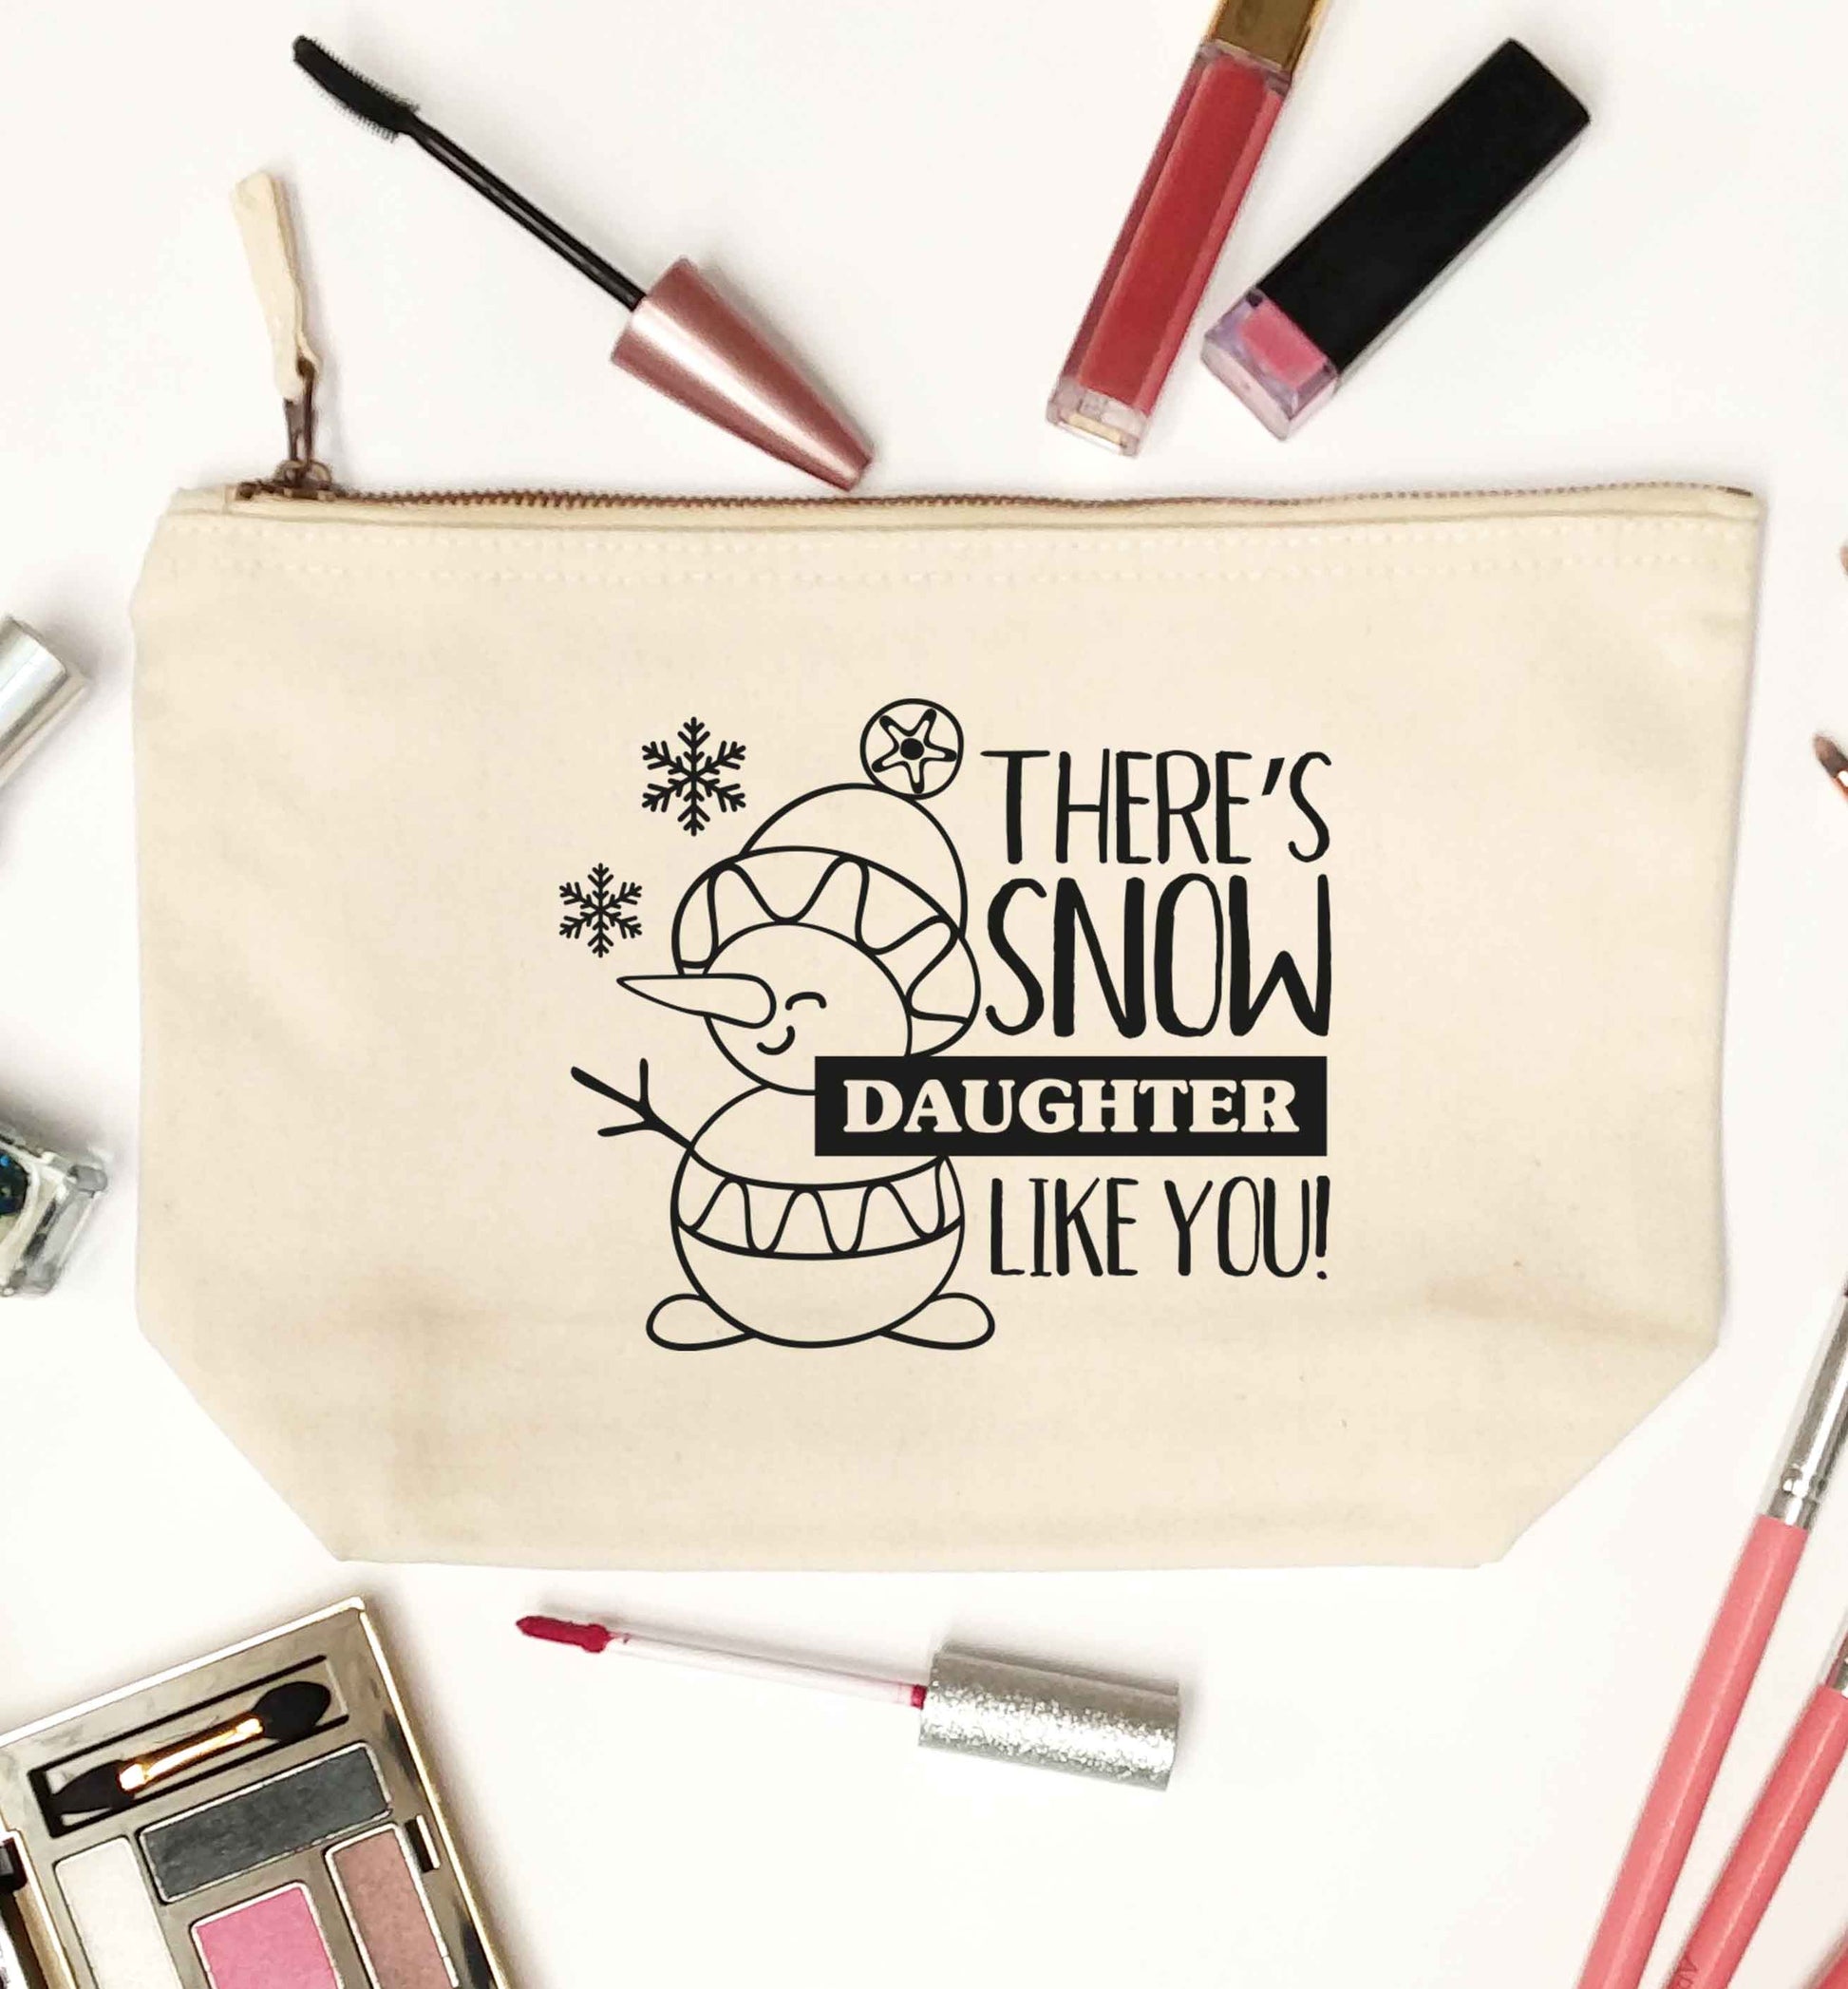 There's snow daughter like you natural makeup bag